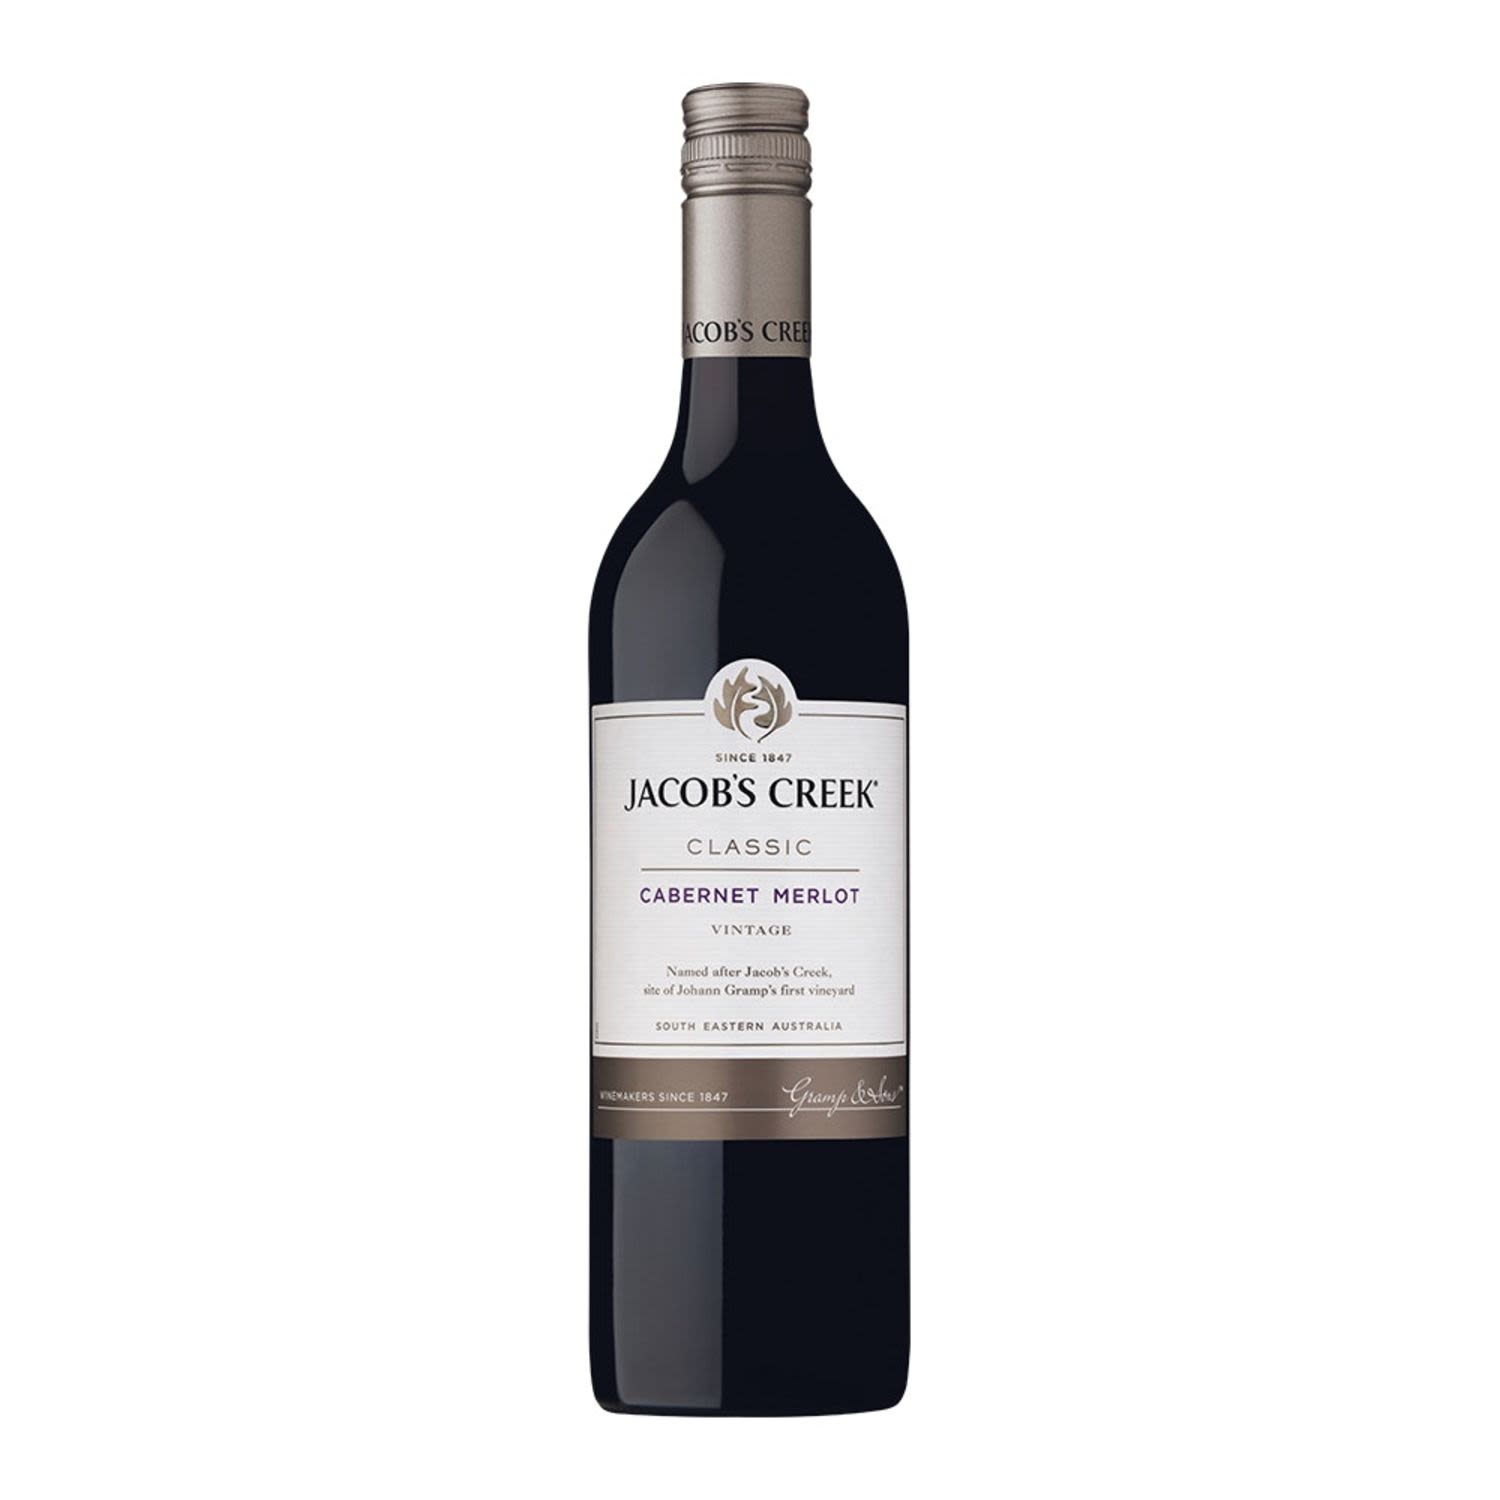 Varietal leafiness from the Cabernet, with notes of cassis. Juicy blackberry and vanilla flavours and dense, ripe tannins. Cabernet provides the structure, with Merlot adding roundness and fruit generosity.<br /> <br />Alcohol Volume: 14.50%<br /><br />Pack Format: Bottle<br /><br />Standard Drinks: 8.6</br /><br />Pack Type: Bottle<br /><br />Country of Origin: Australia<br /><br />Region: South Eastern Australia<br /><br />Vintage: Vintages Vary<br />